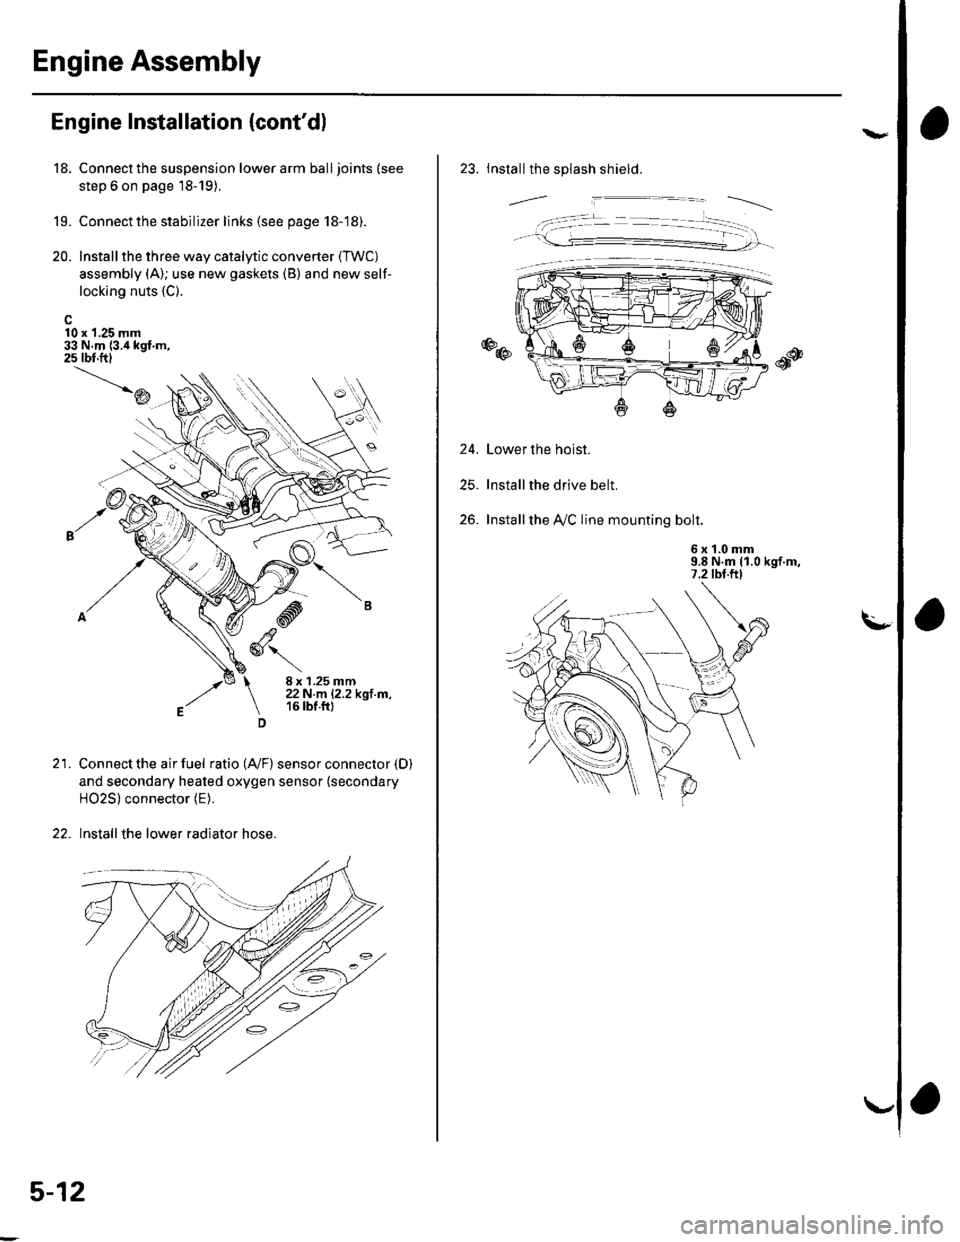 HONDA CIVIC 2002 7.G Workshop Manual Engine Assembly
18.
Engine Installation {contdl
10 x 1.25 mm33 N.m {3.i1kgf.m,25 tbt.ftl
19.
20.
Connect the suspension lower arm ball joints (see
step 6 on page 18-19).
Connect the stabilizer links 